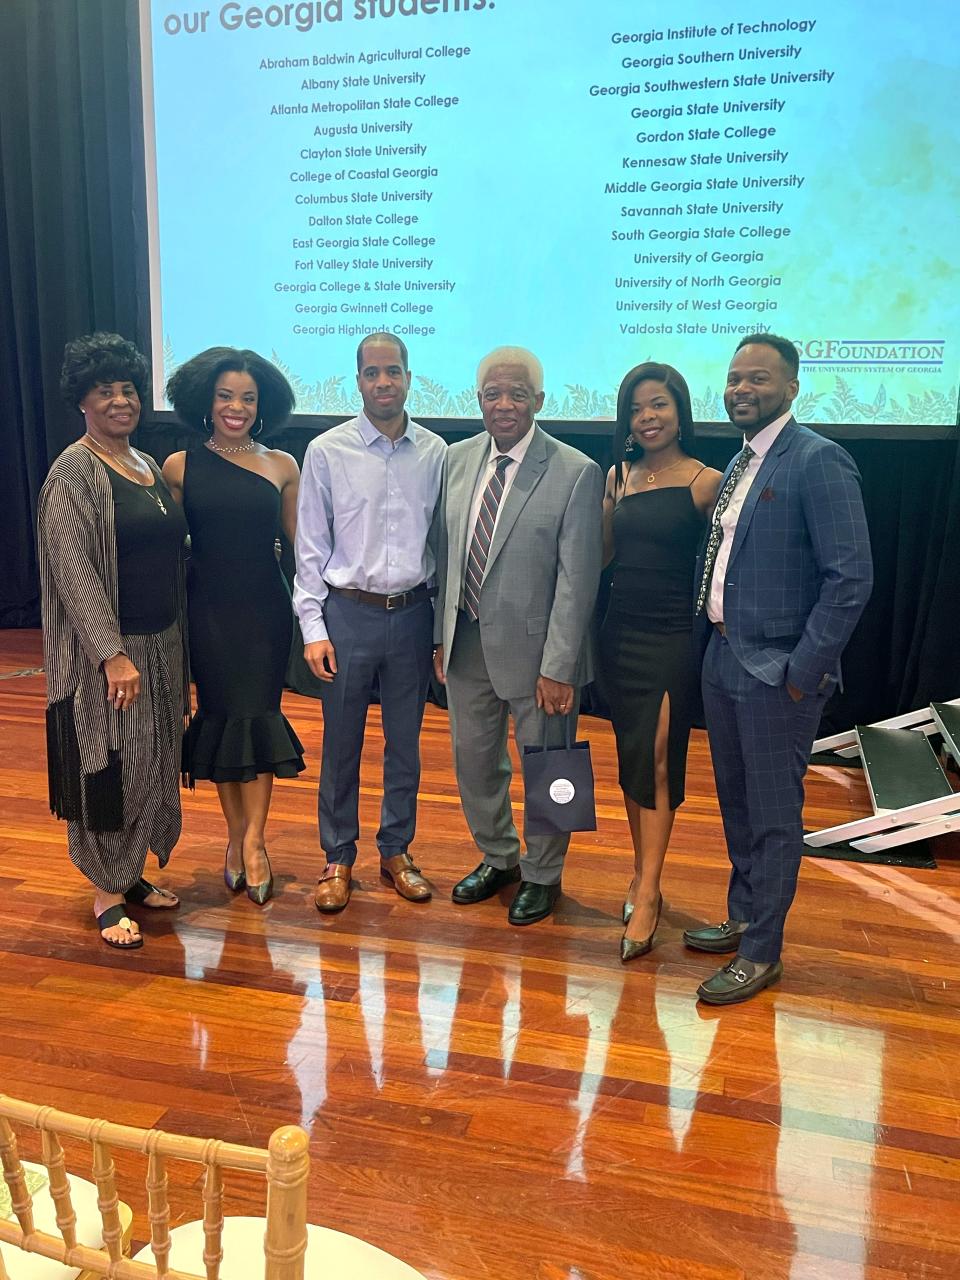 Dr. Hobbs’ wife Janice, his daughter Tiffany, son Reginald, Dr. Hobbs (center), daughter Dr. April Hobbs and her husband Dr. Charlton Conner